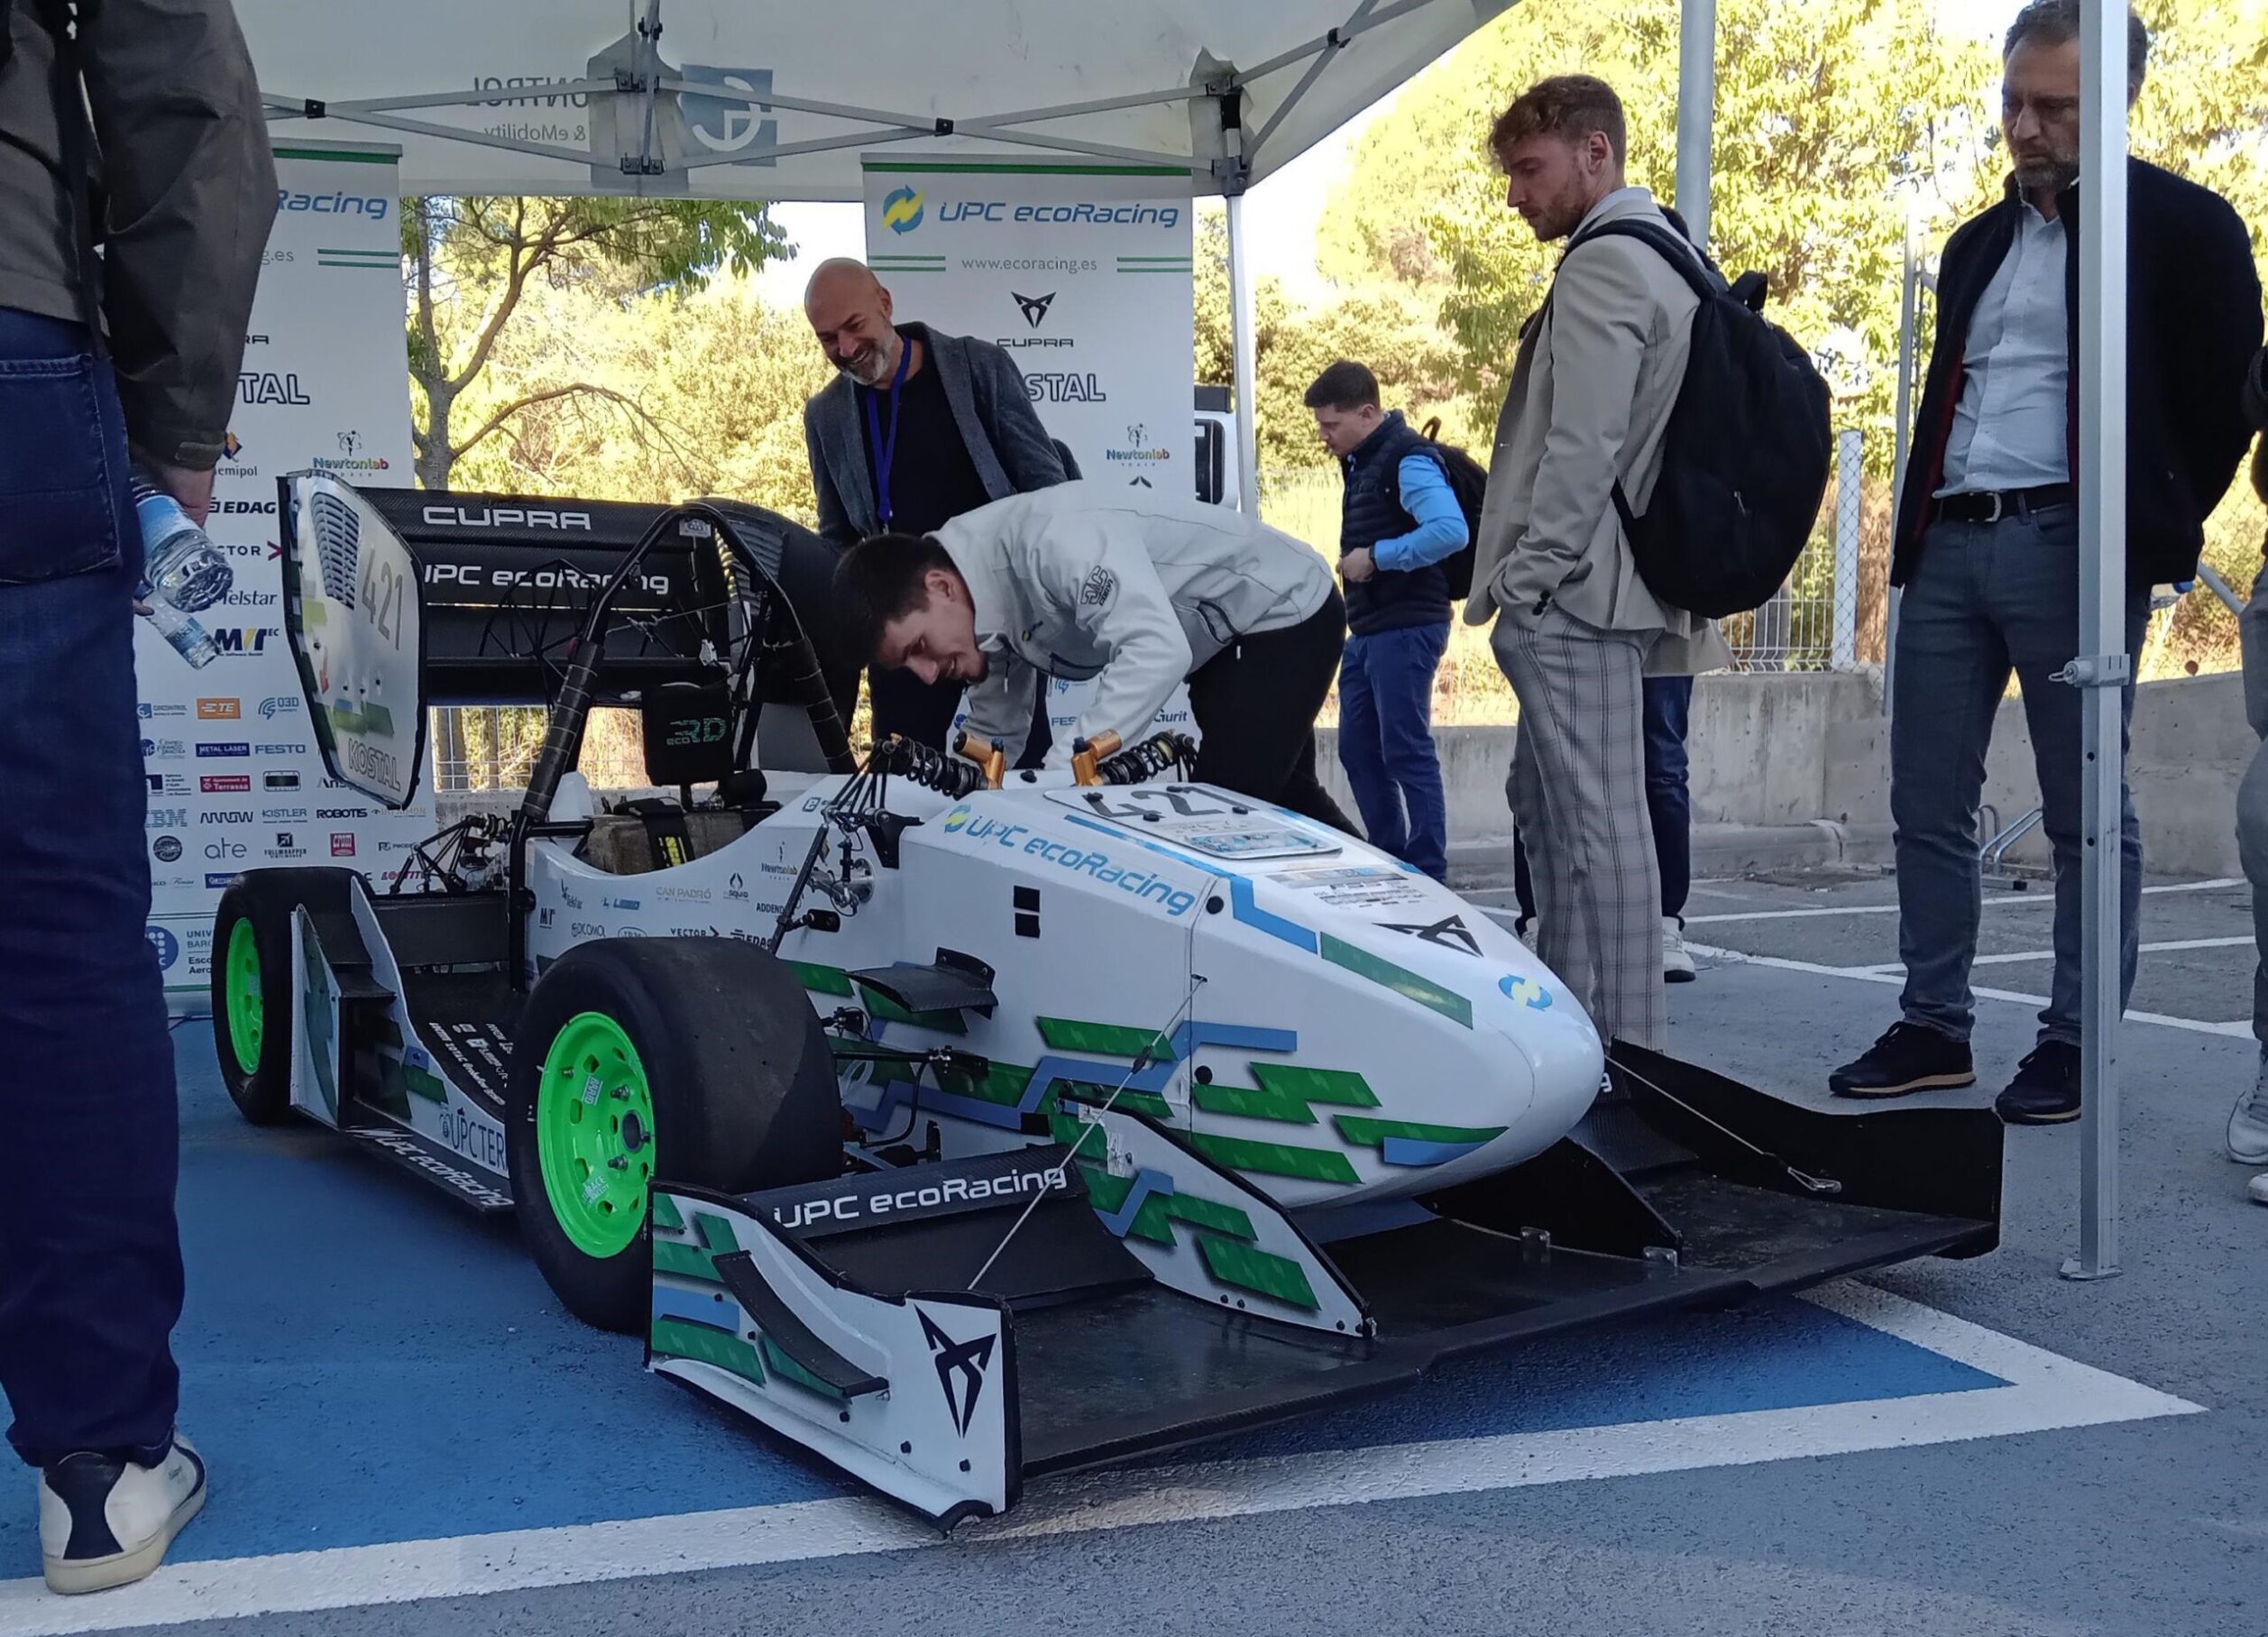 Circontrol promotes technical expertise for UPC's ecoRacing project